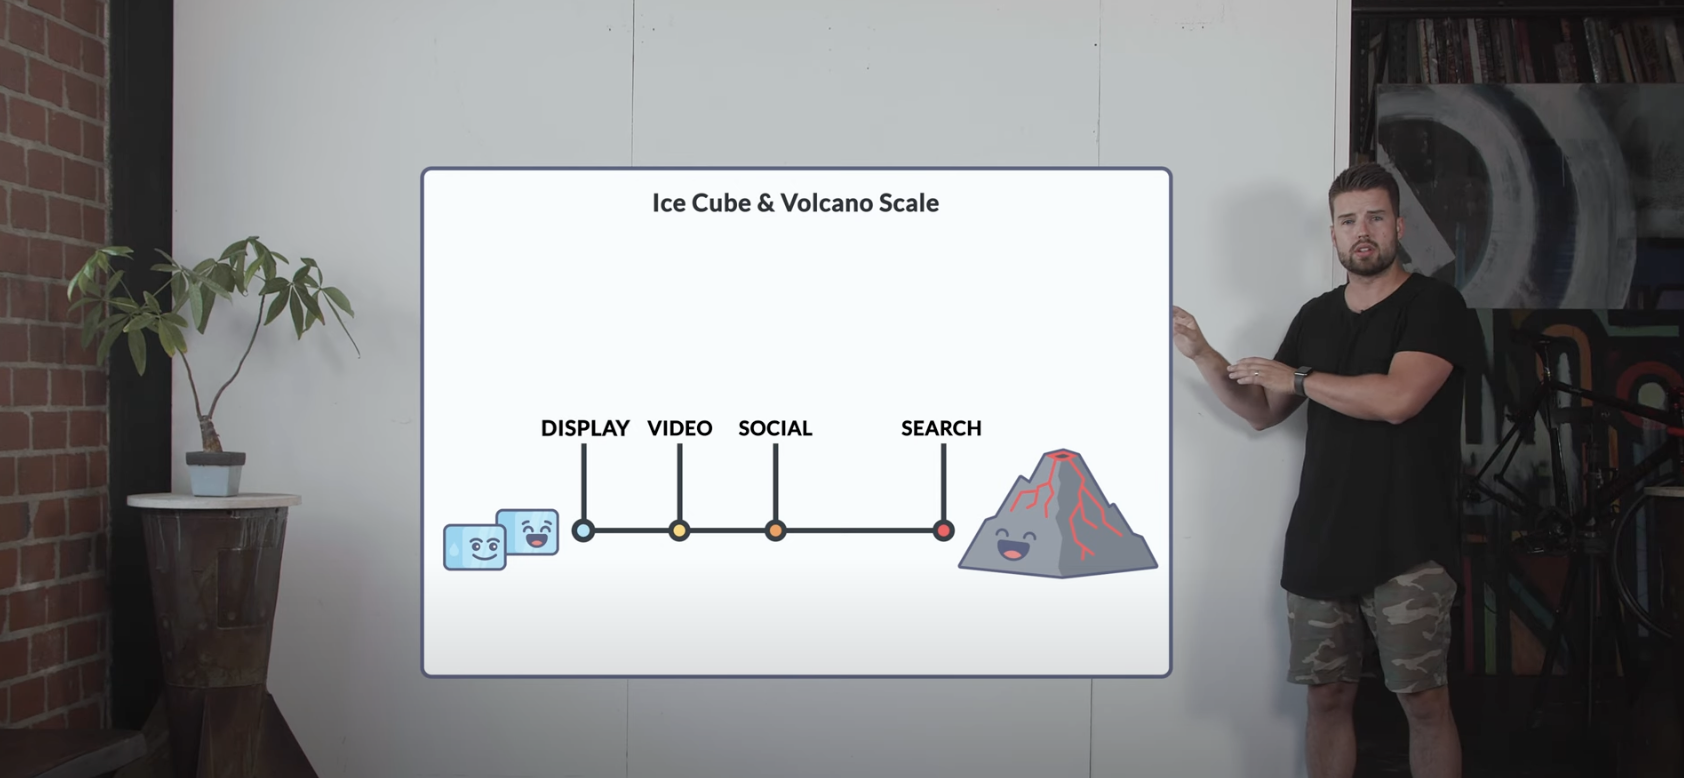 Ice Cube and Volcano Scale